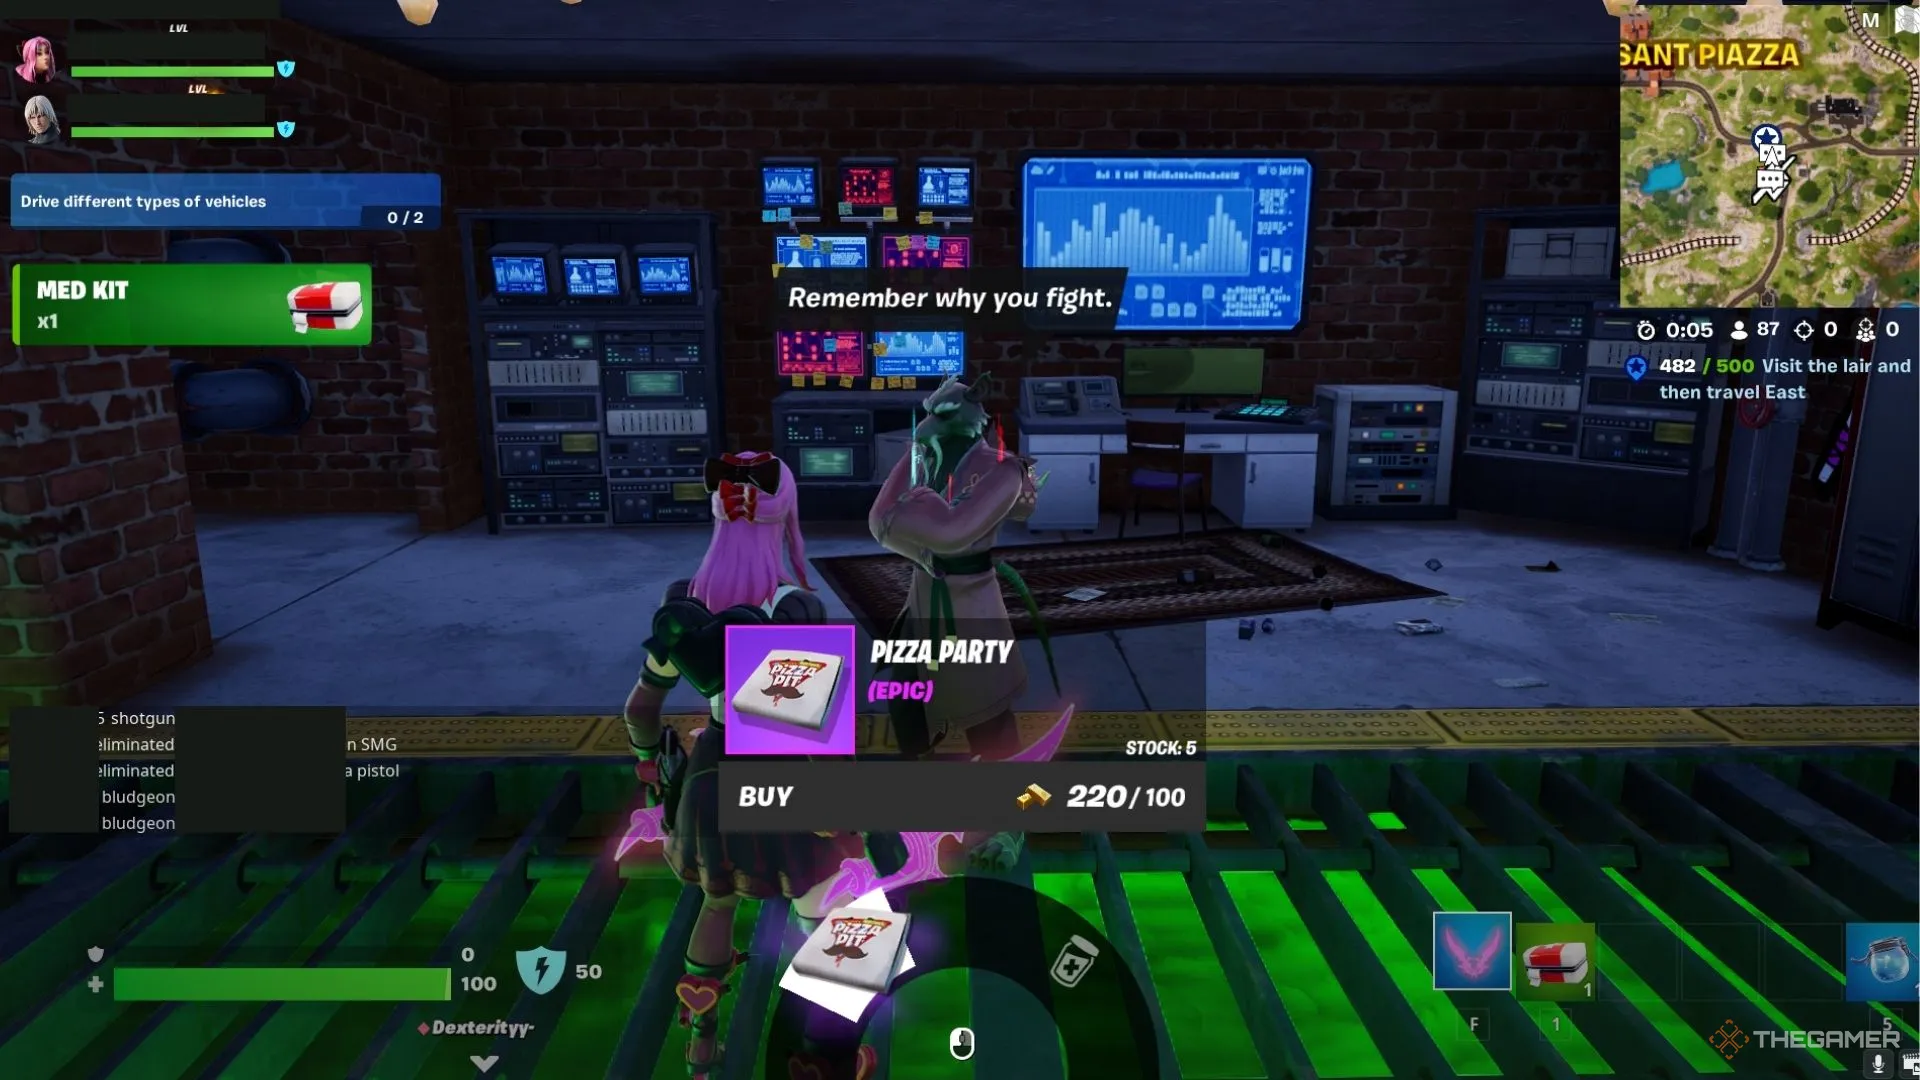 Buying the Fortnite Pizza Party from Splinter in the Lair